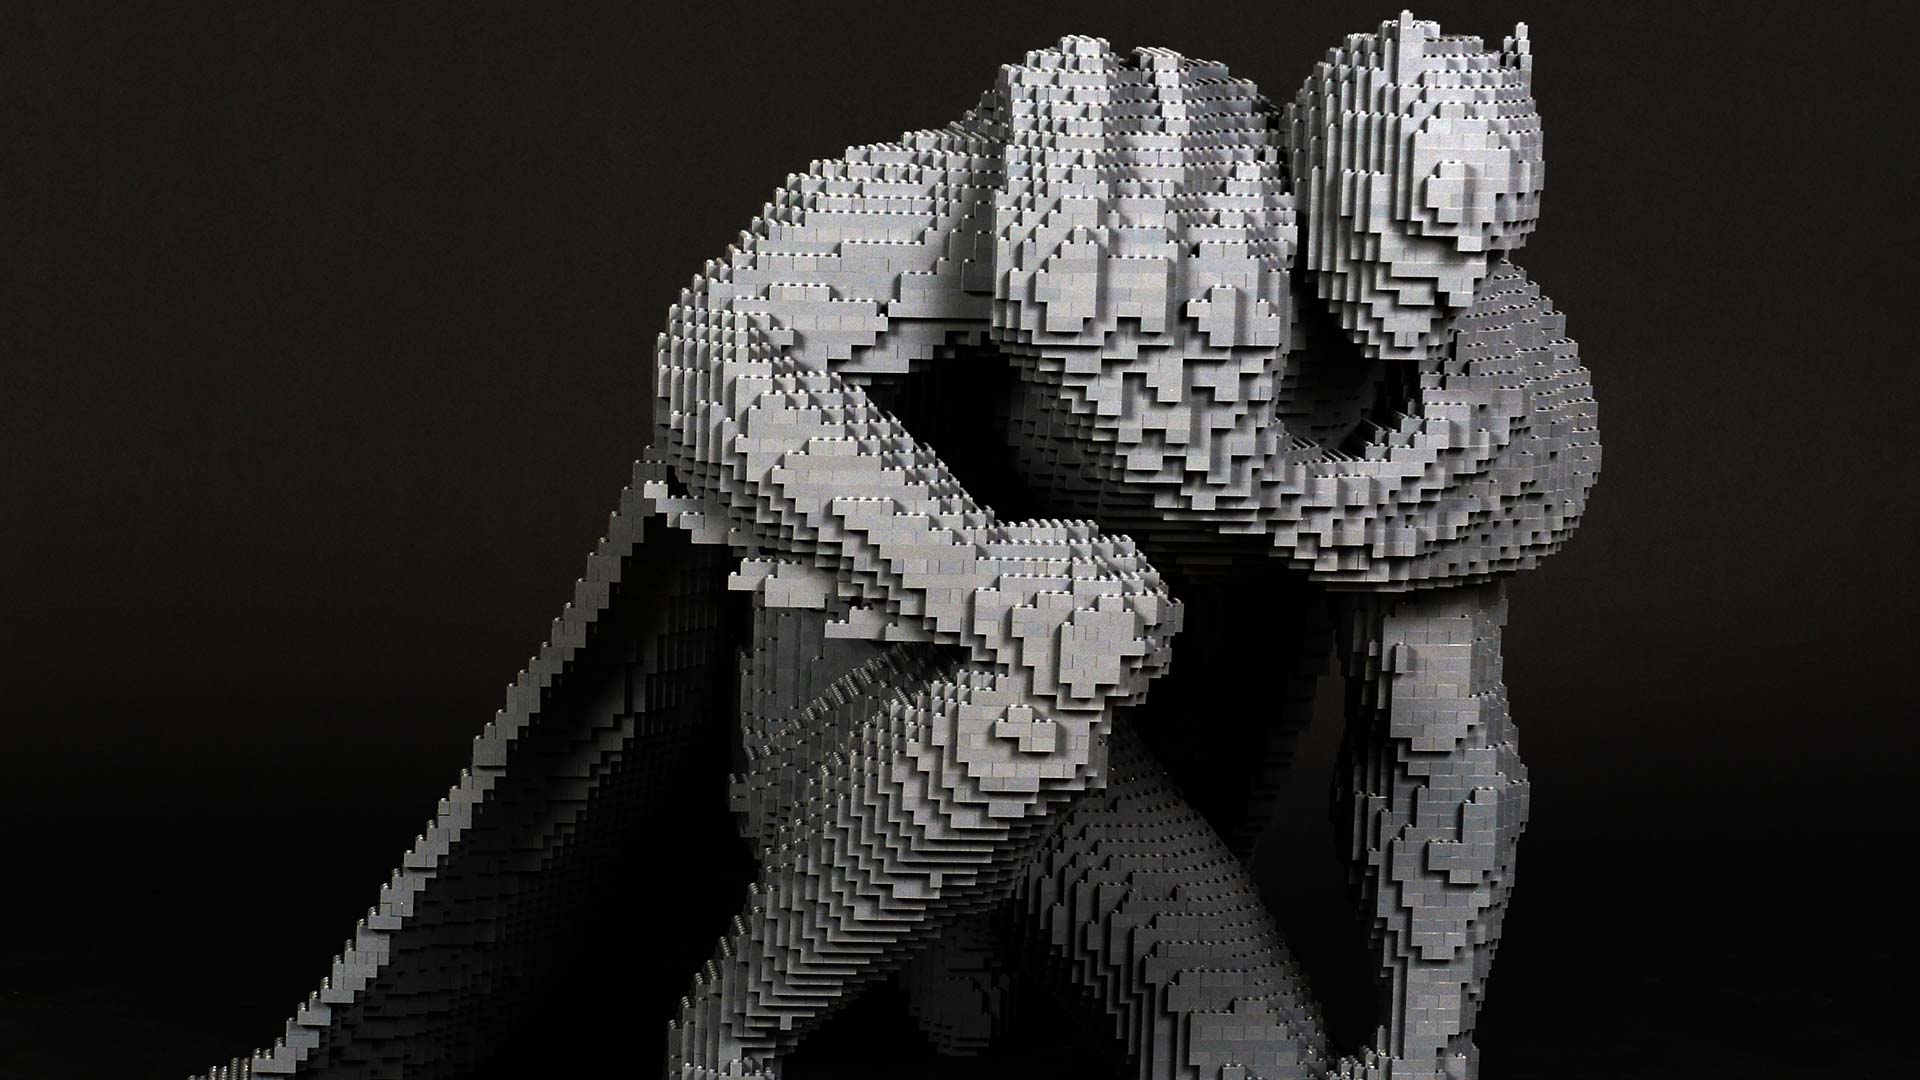 Announced at San Diego Comic-Con: The Art of the Brick: DC Comics | DC